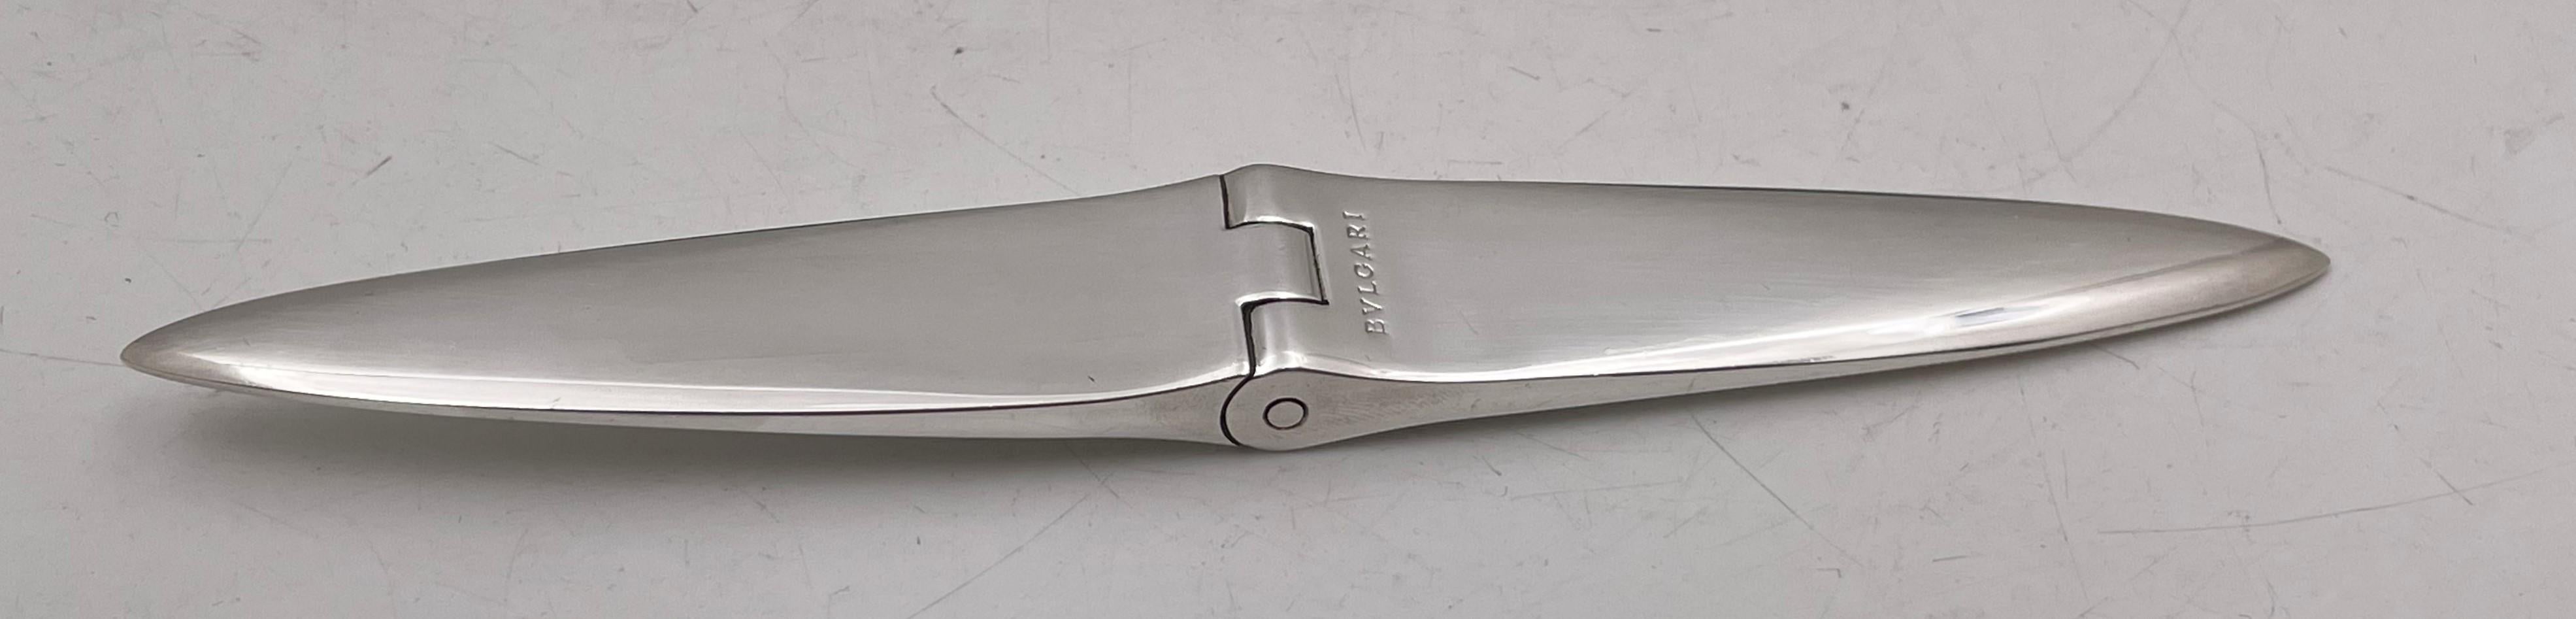 Bvlgari / Bulgari sterling silver letter opener with heavy gage silver. This high-quality decorative piece measures 7 1/2'' in length by 1'' in width, marked 